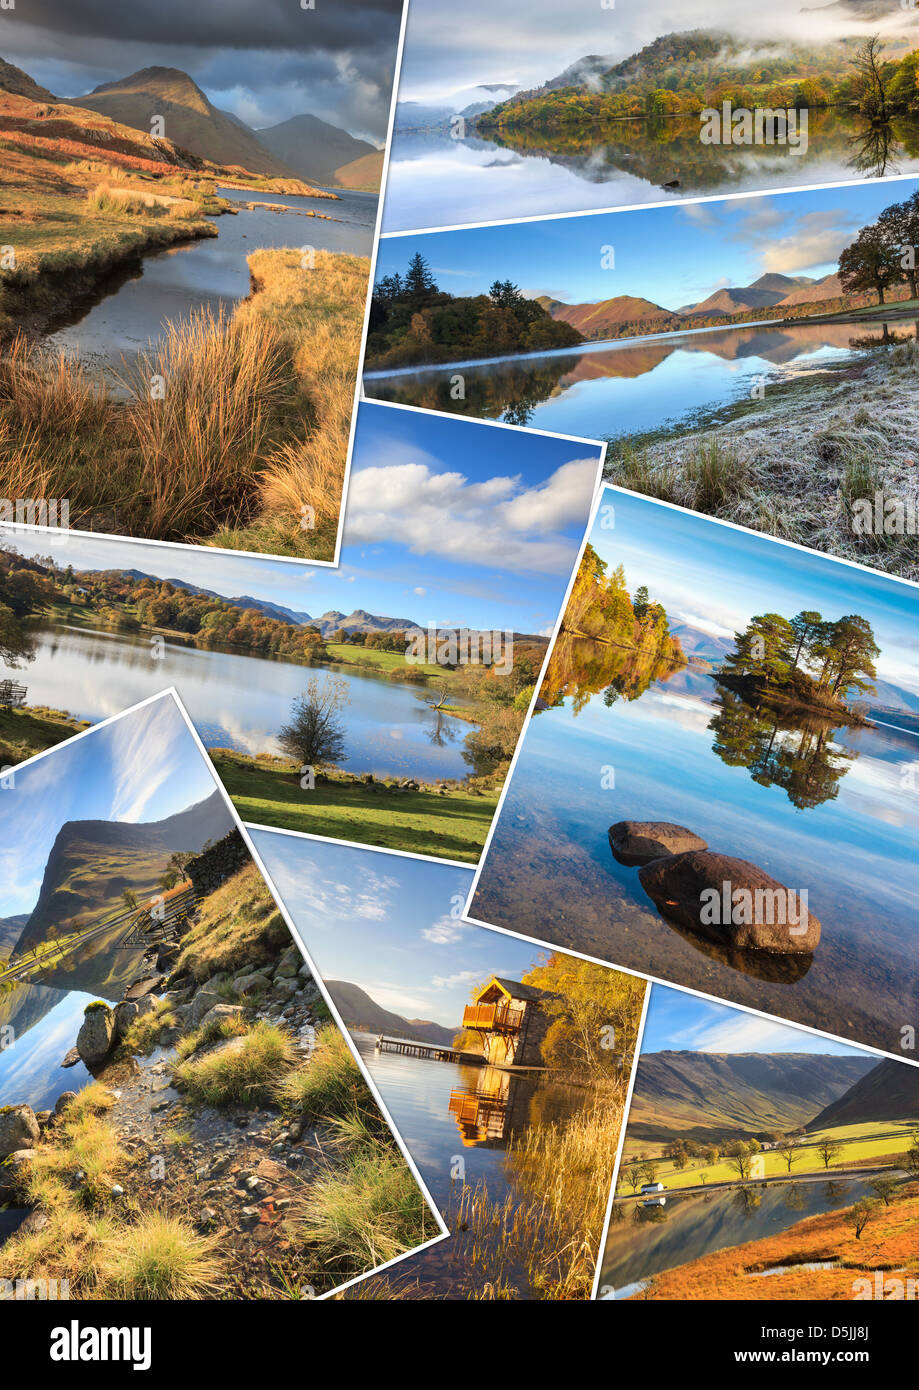 A montage of 8 images of the Lake District National Park Stock Photo